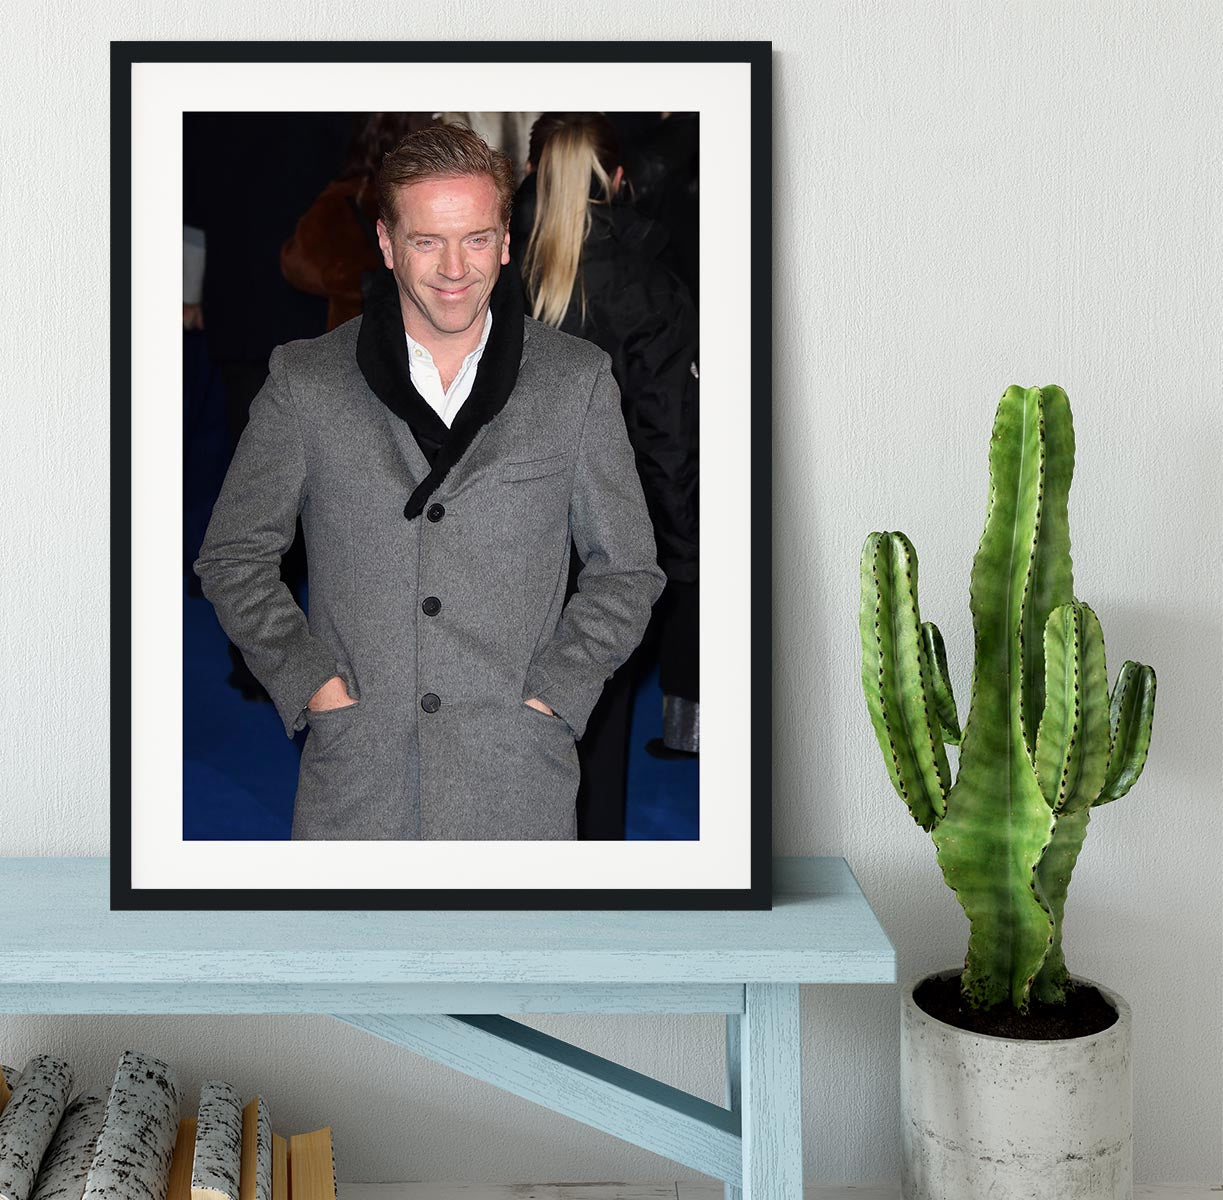 Damian Lewis on the red carpet Framed Print - Canvas Art Rocks - 1